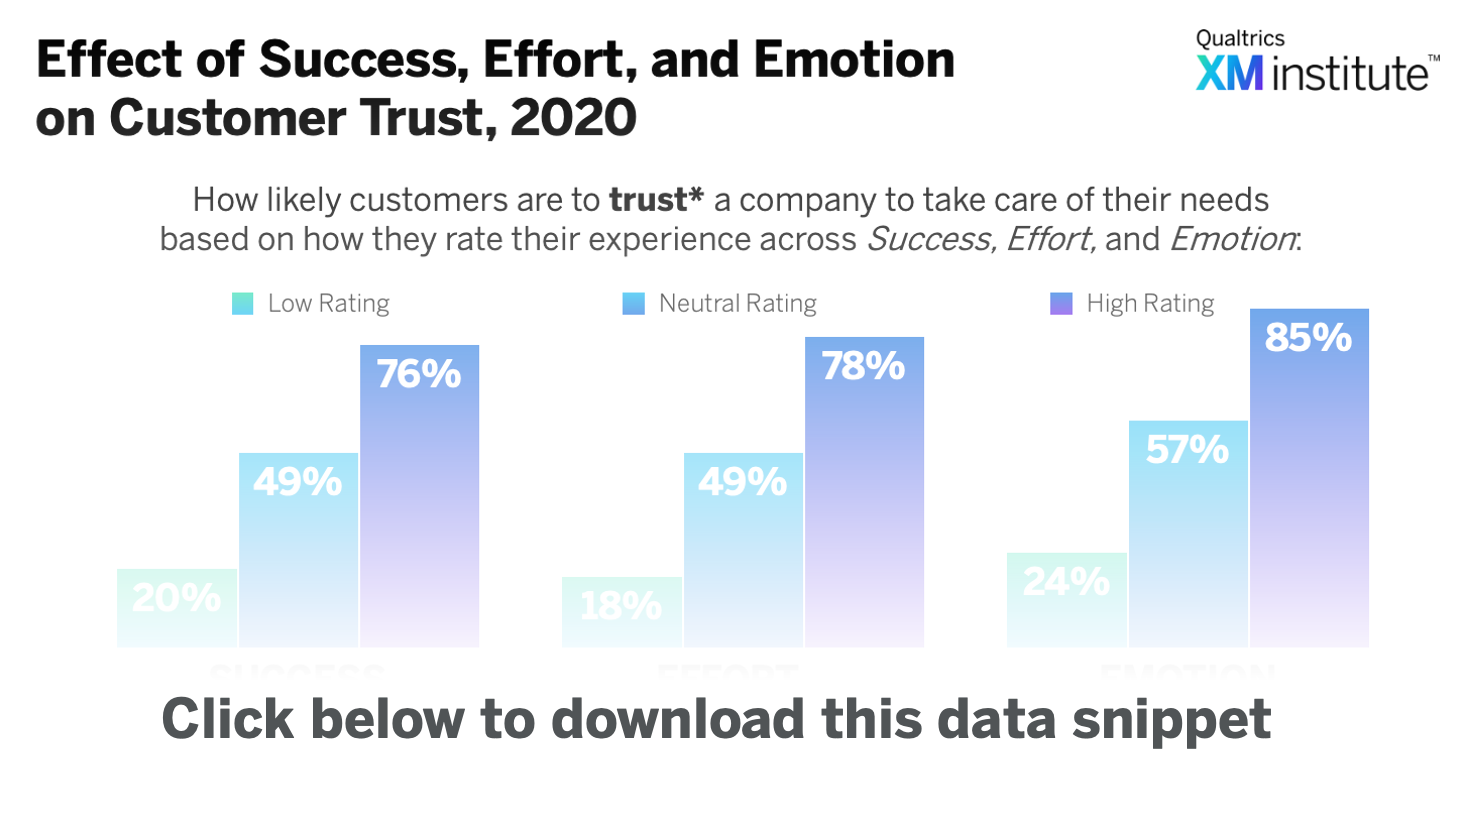 Download Image - Effect of SEE on Trust